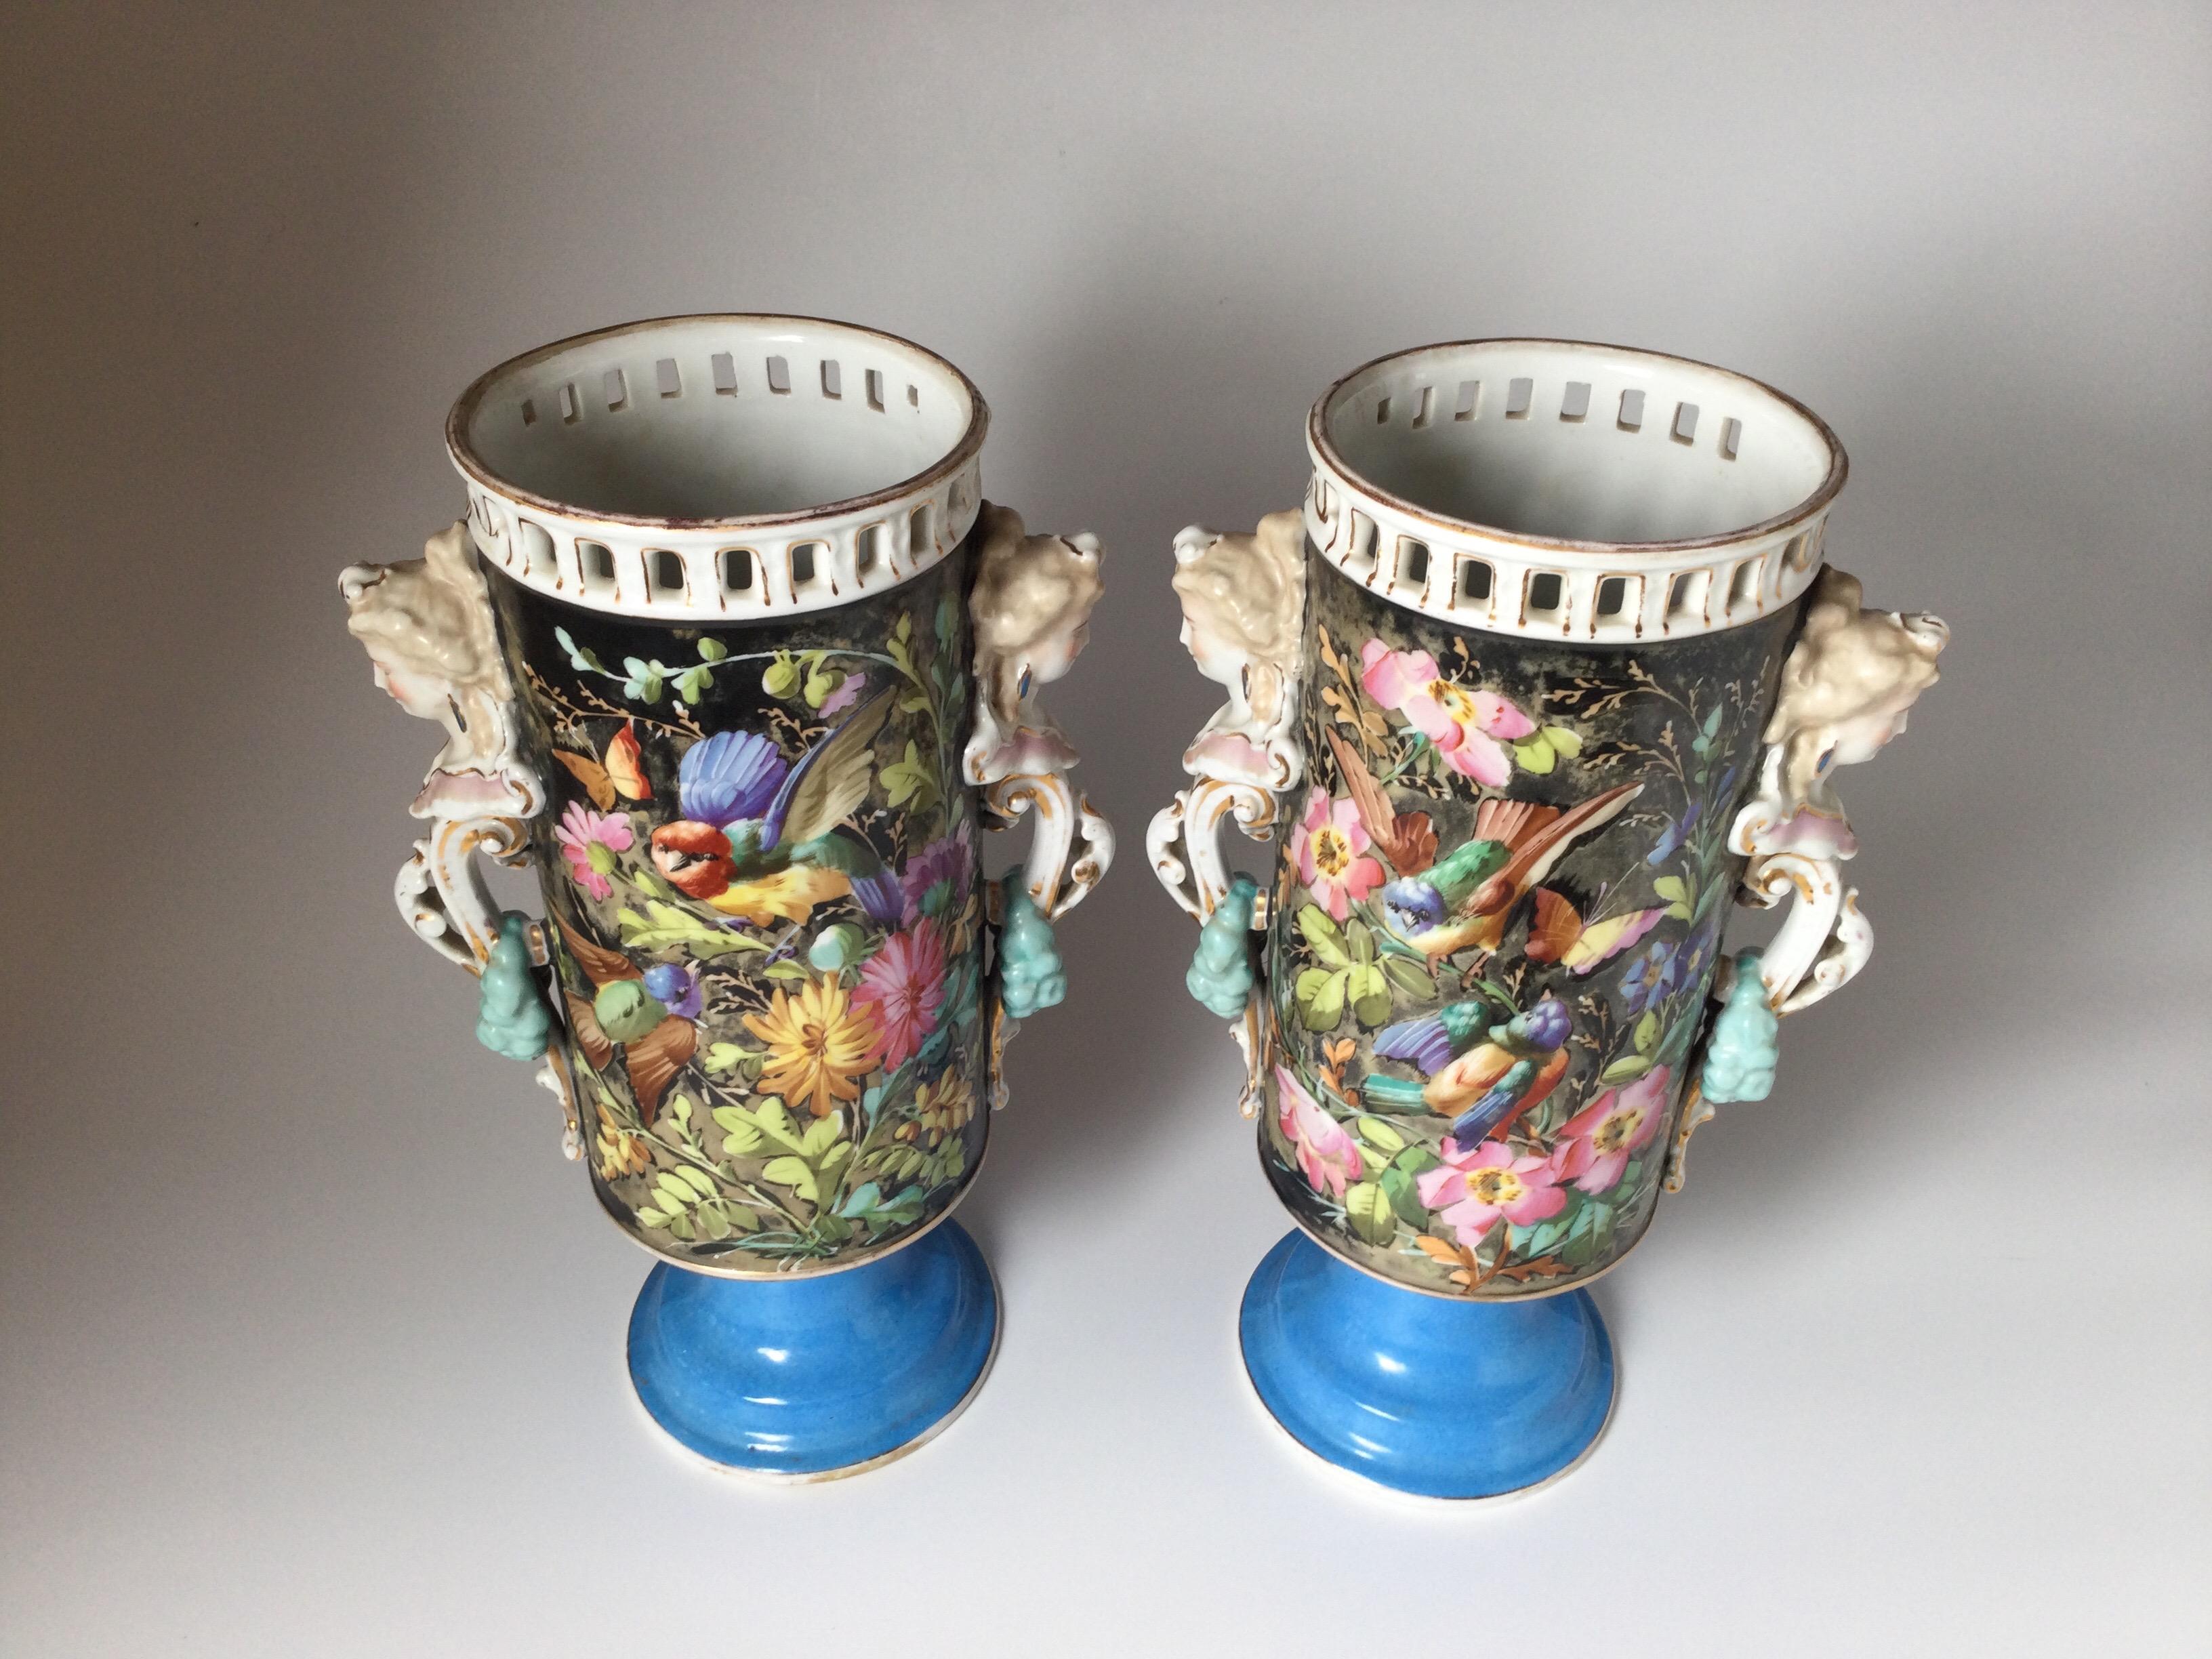 A Large pair of Paris porcelain two handled vases with floral and bird decoration. The rims with reticulated border with female figural handles resting on a Celest blue pedestal base.